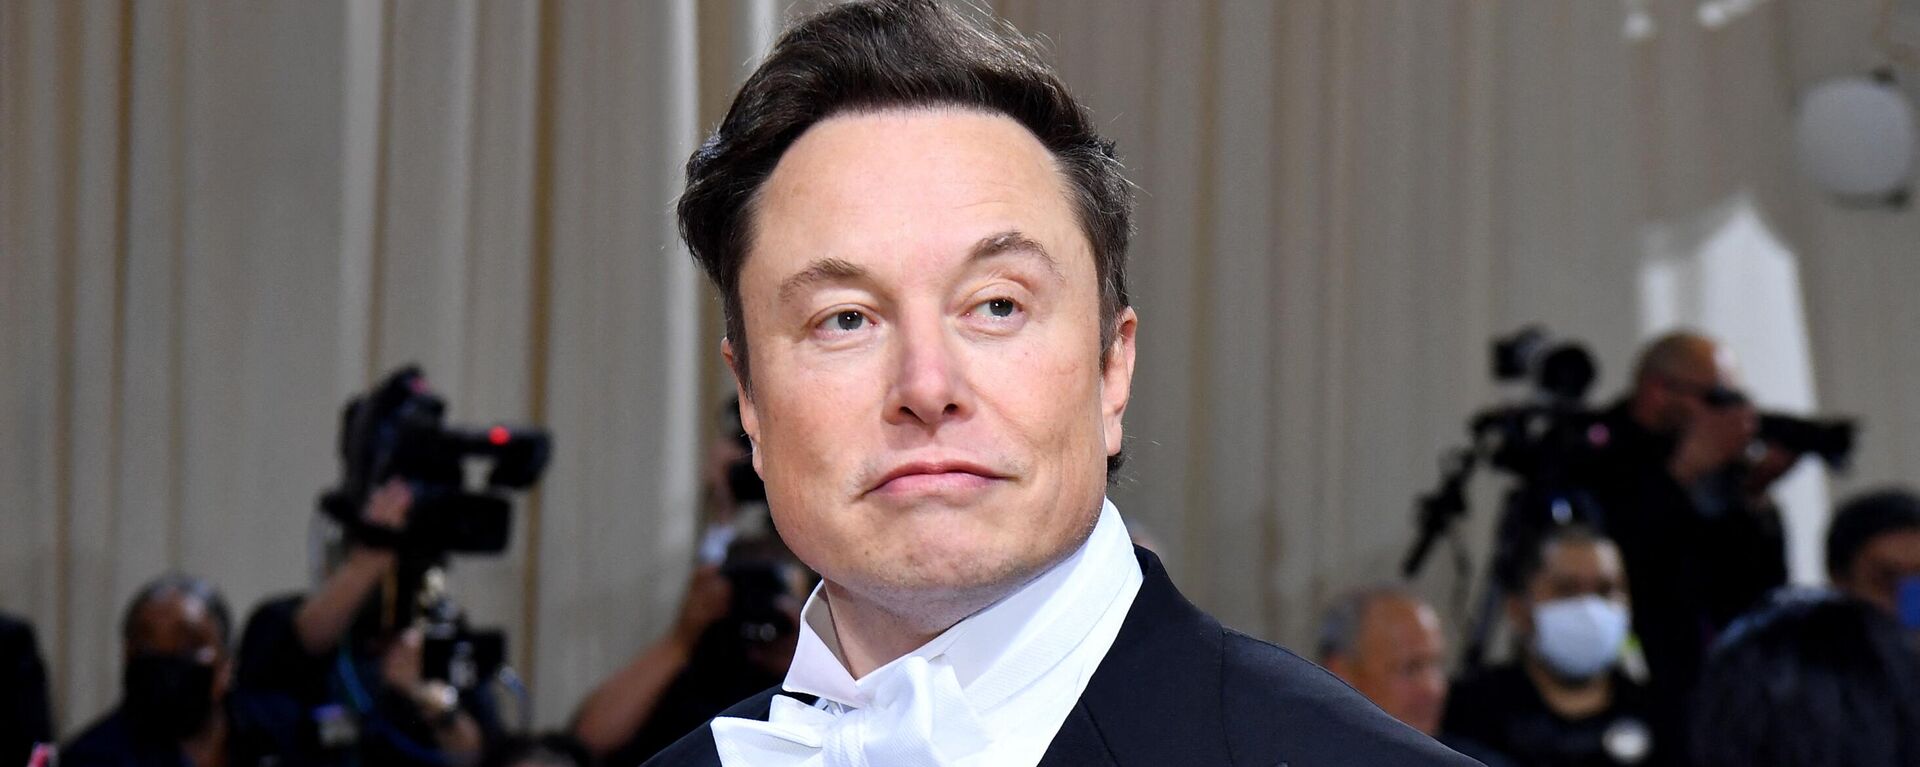 CEO, and chief engineer at SpaceX, Elon Musk, arrives for the 2022 Met Gala at the Metropolitan Museum of Art on May 2, 2022, in New York. - Sputnik International, 1920, 16.12.2022